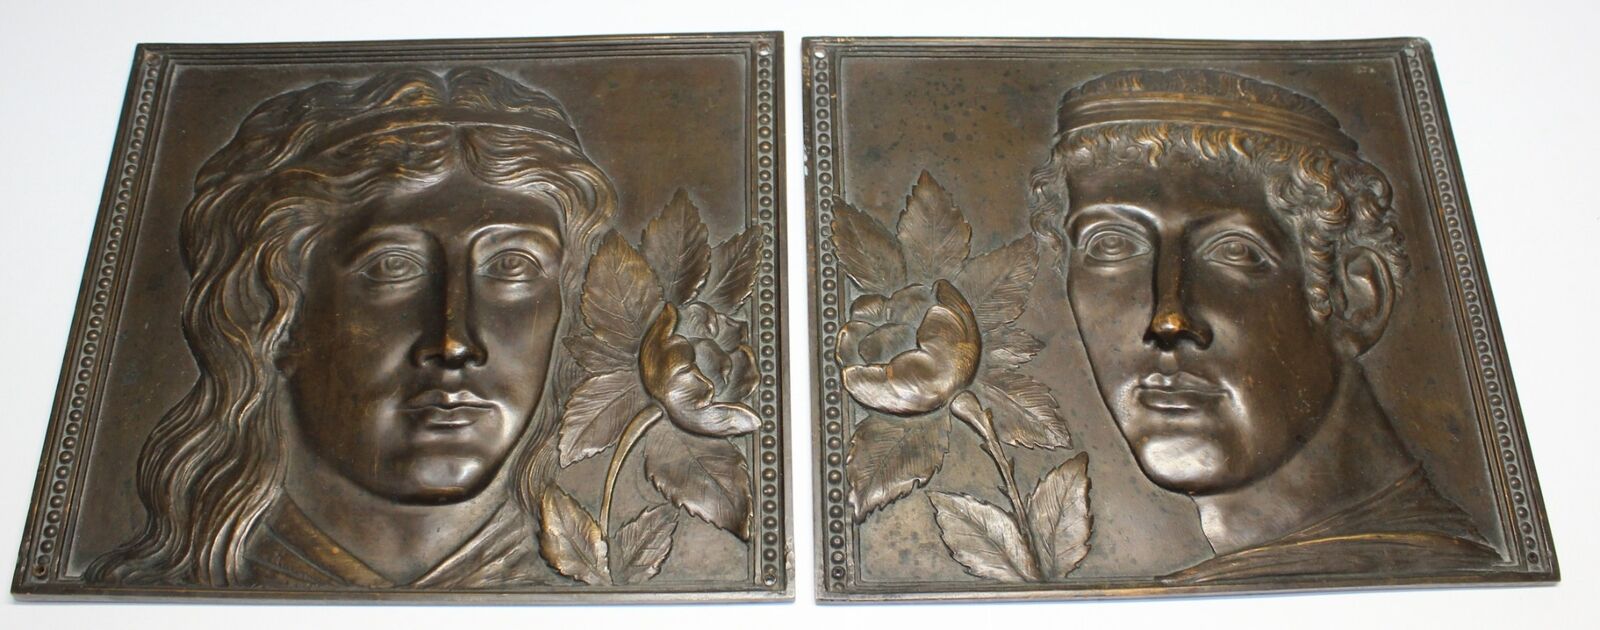 PR. ANTIQUE HIGH RELIEF BRONZE PLAQUES OF A MAN AND WOMAN